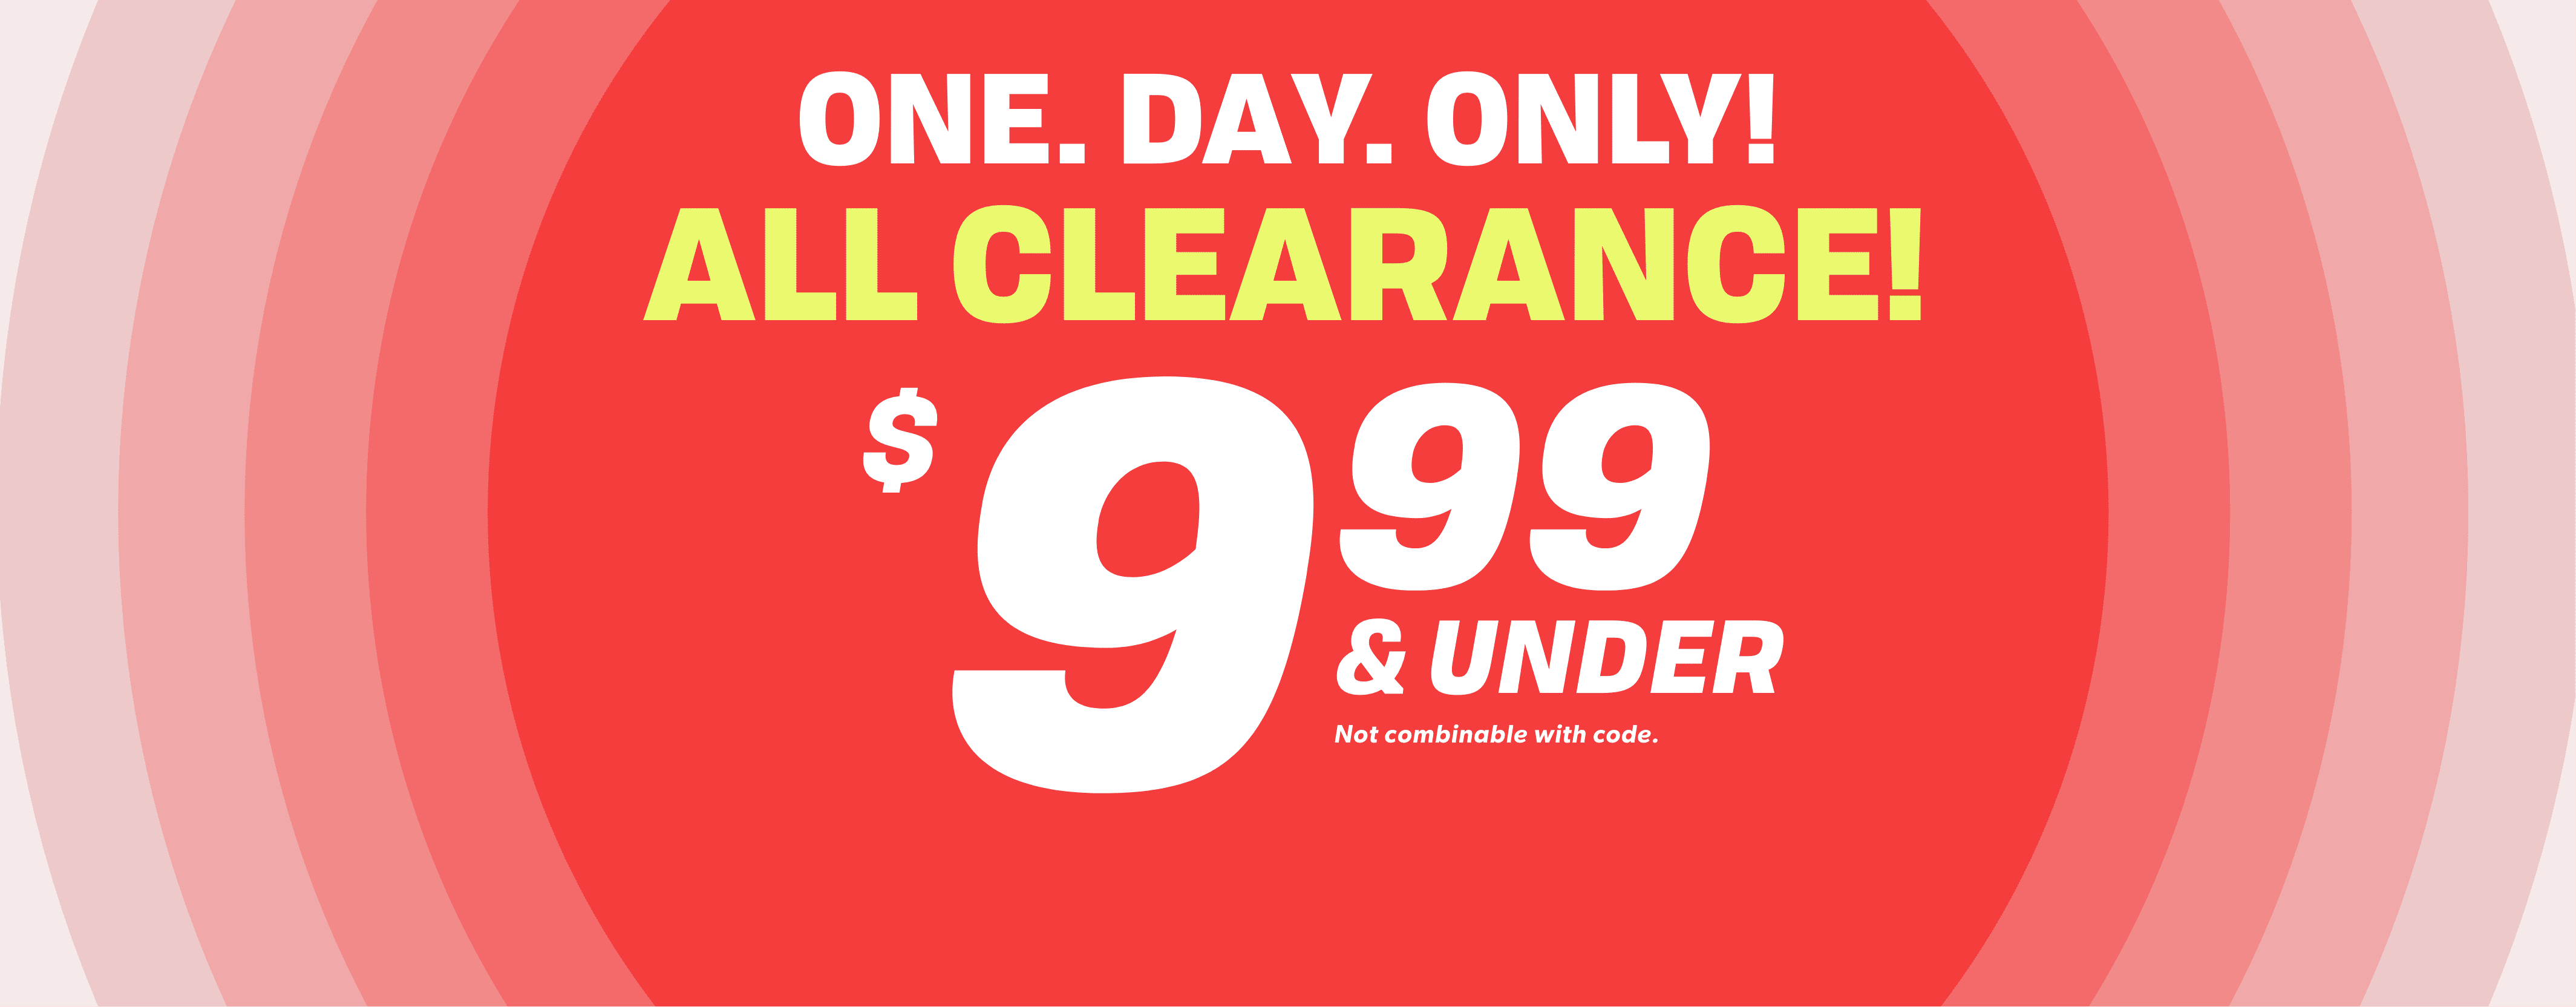 ONE. DAY. ONLY! ALL CLEARANCE $9.99 & UNDER Not combinable with code.